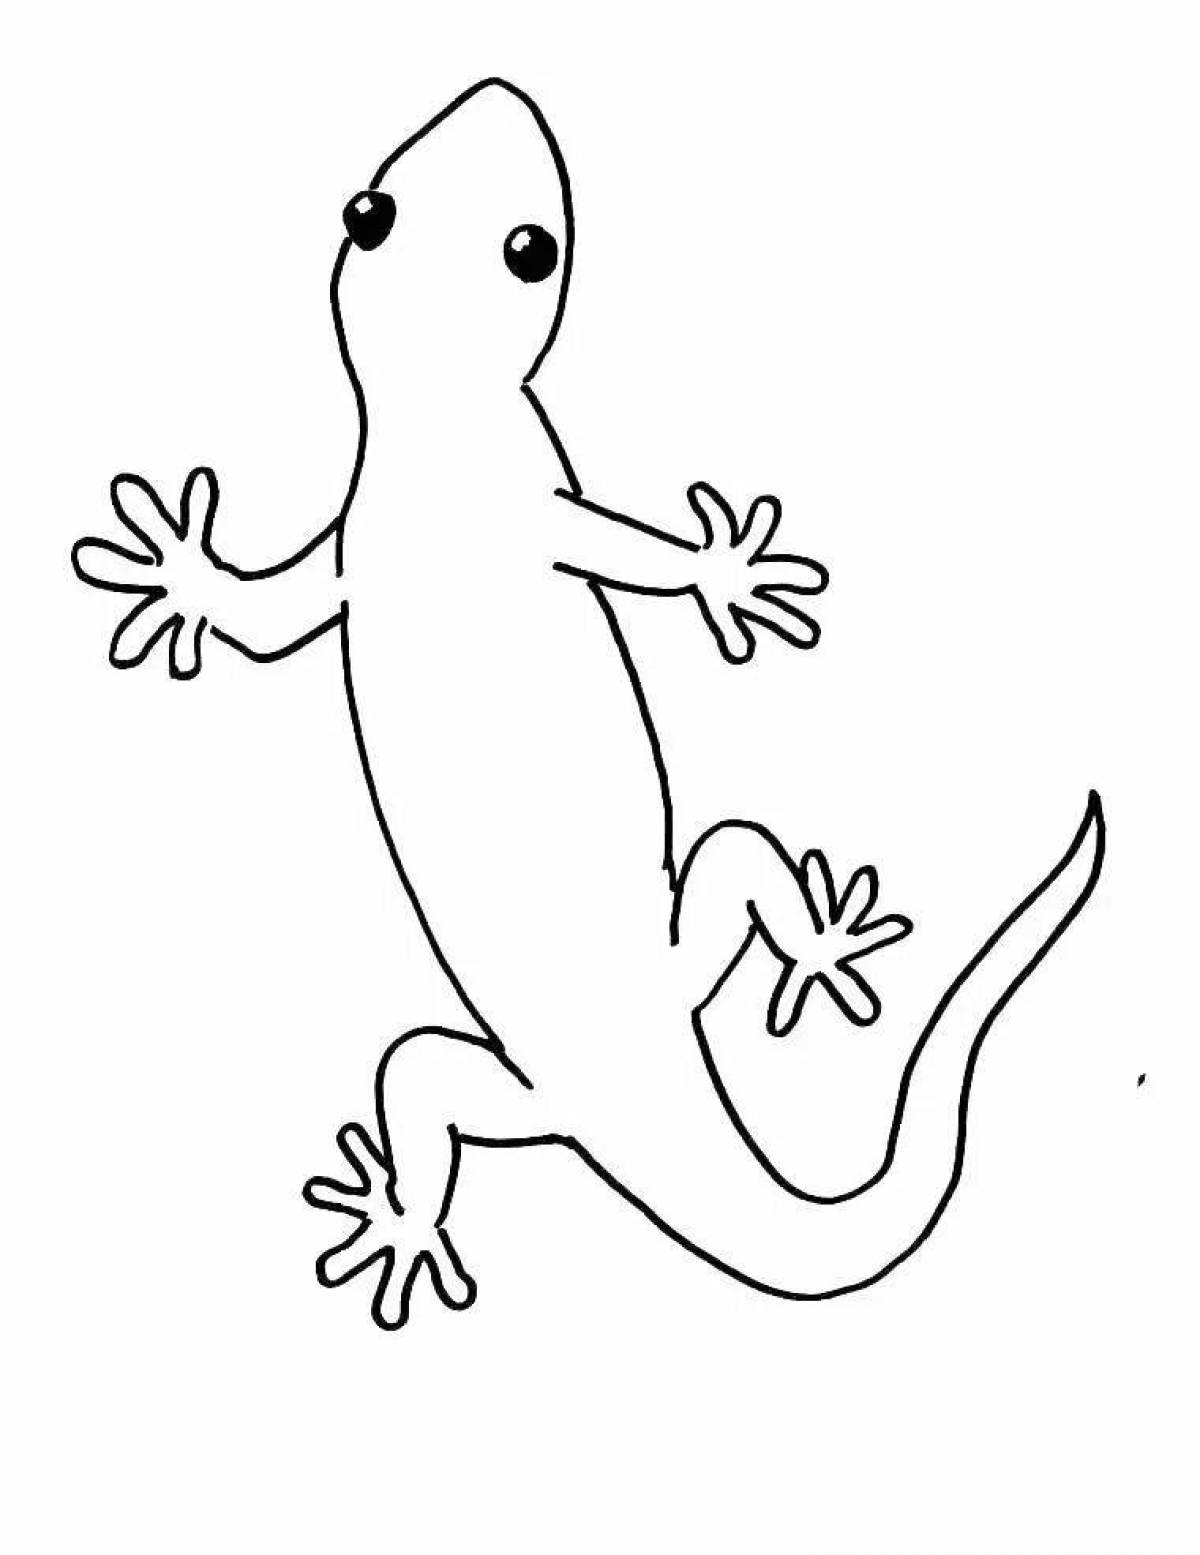 Adorable gecko coloring page